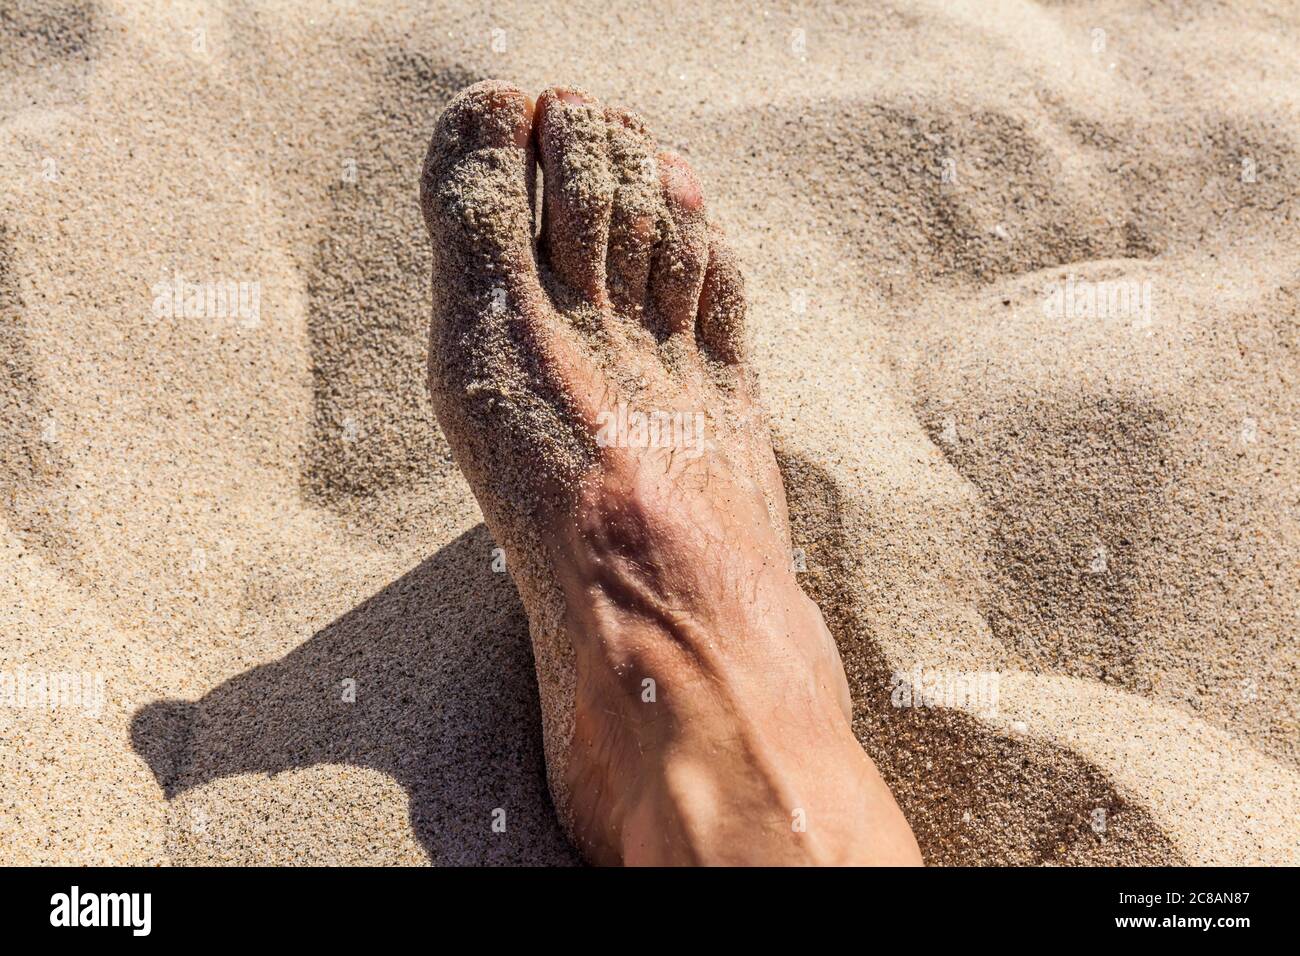 A closeup view of a man's foot in the sand. Stock Photo